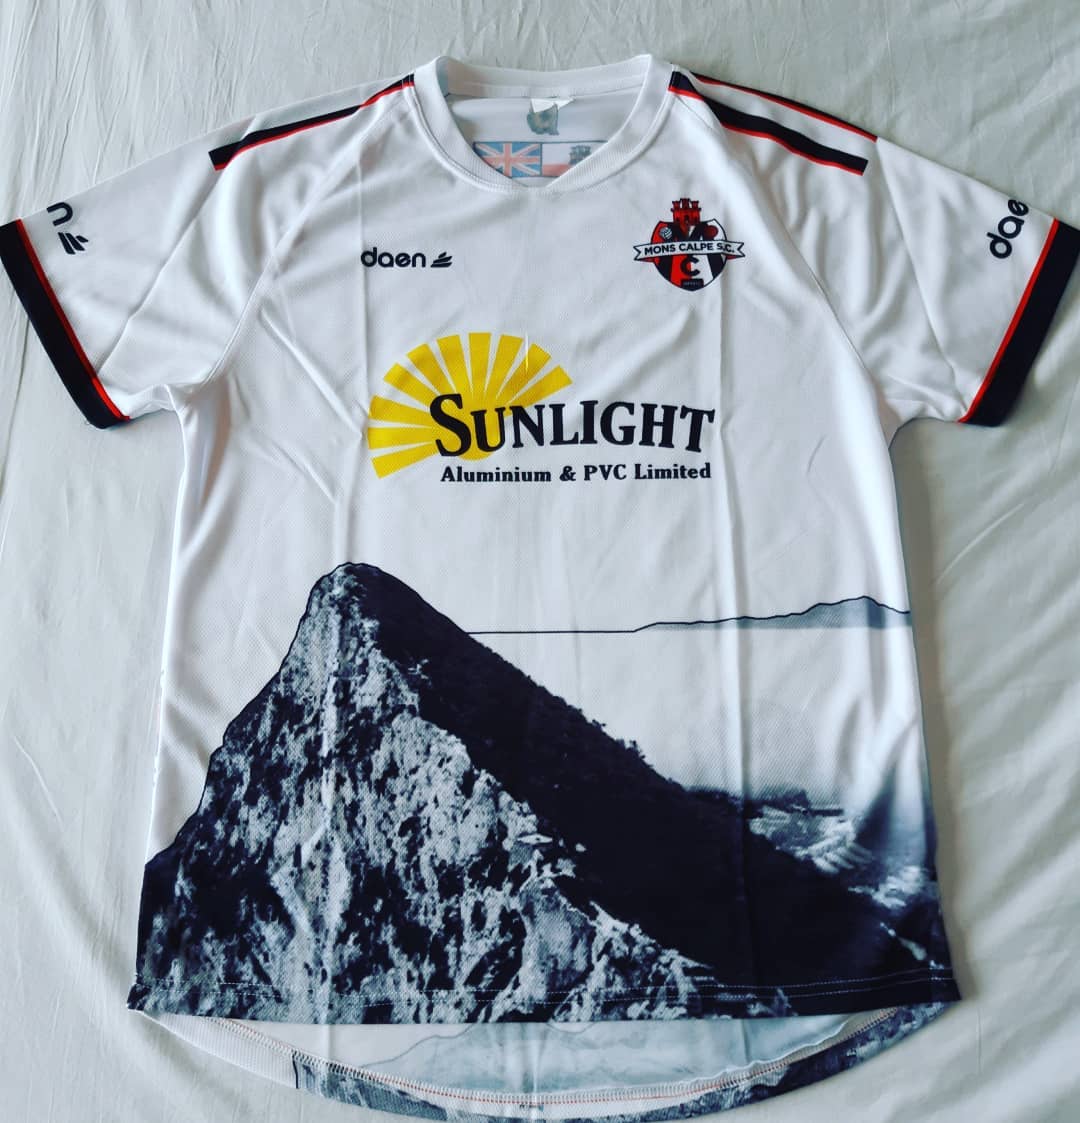 Mons Calpe S.C. Away 2015/2016 Football Shirt Manufactured By Daen. The club plays football in Gibraltar.